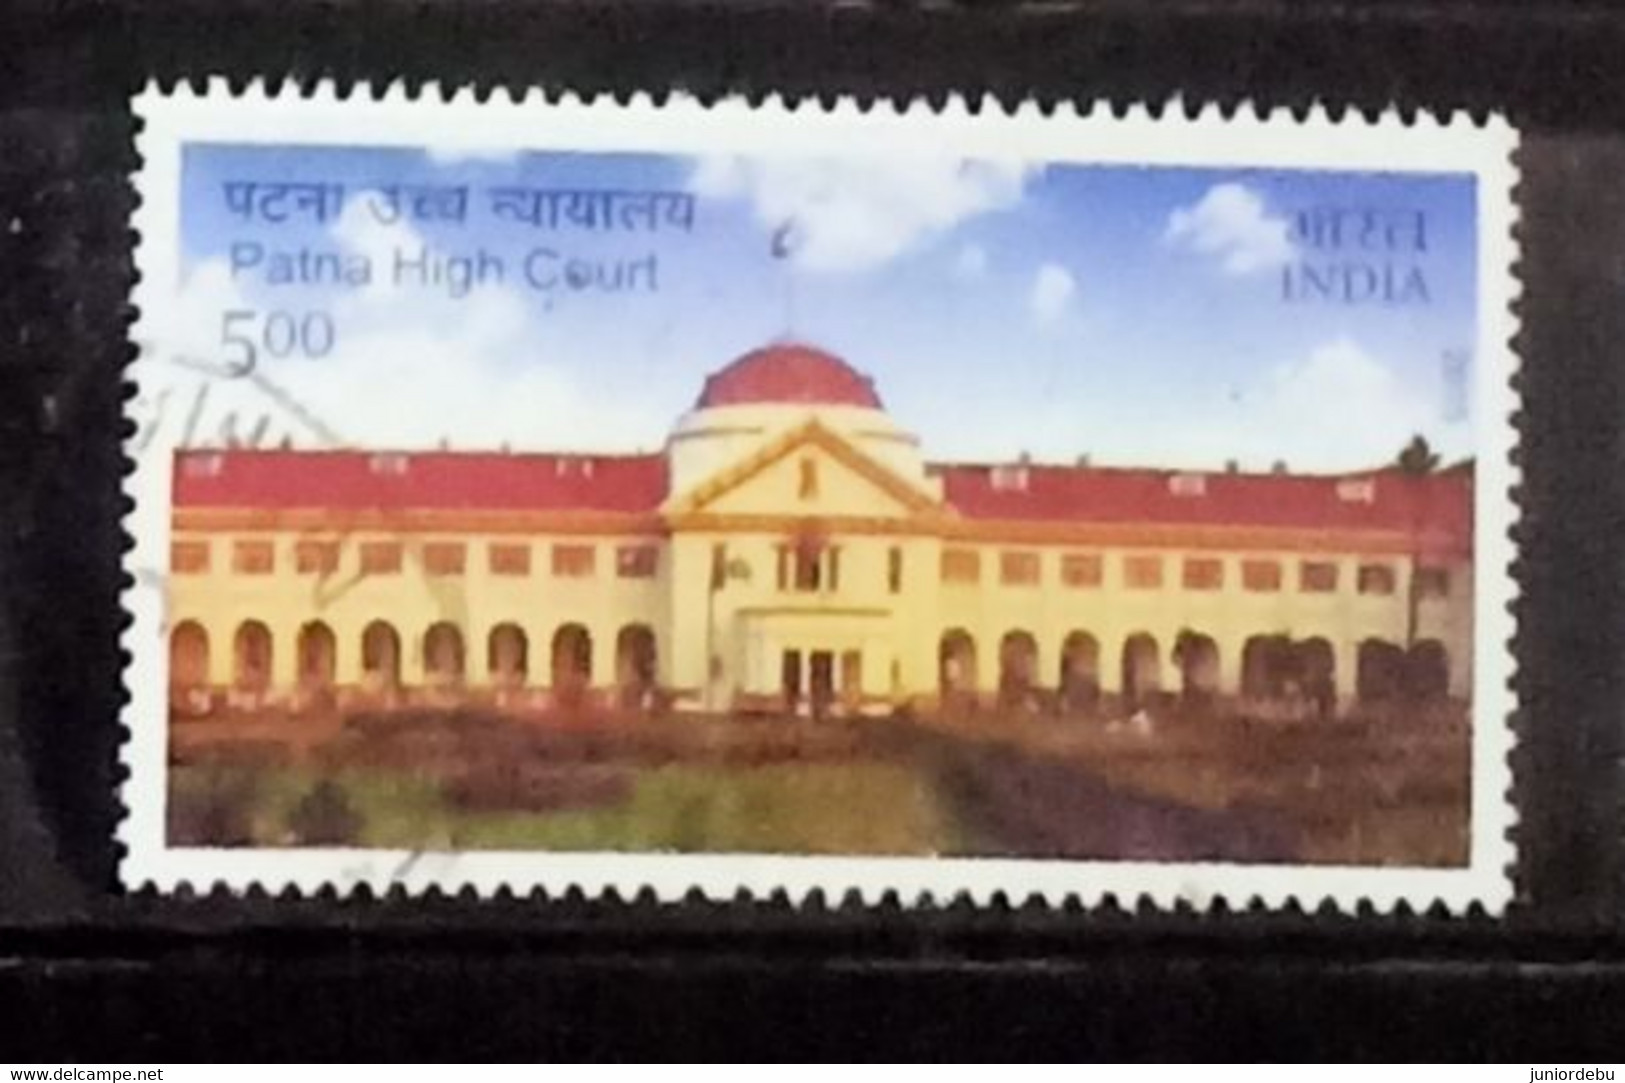 India - 2015 -  Patna High Court   - Used. Condition As Per Scan. - Used Stamps